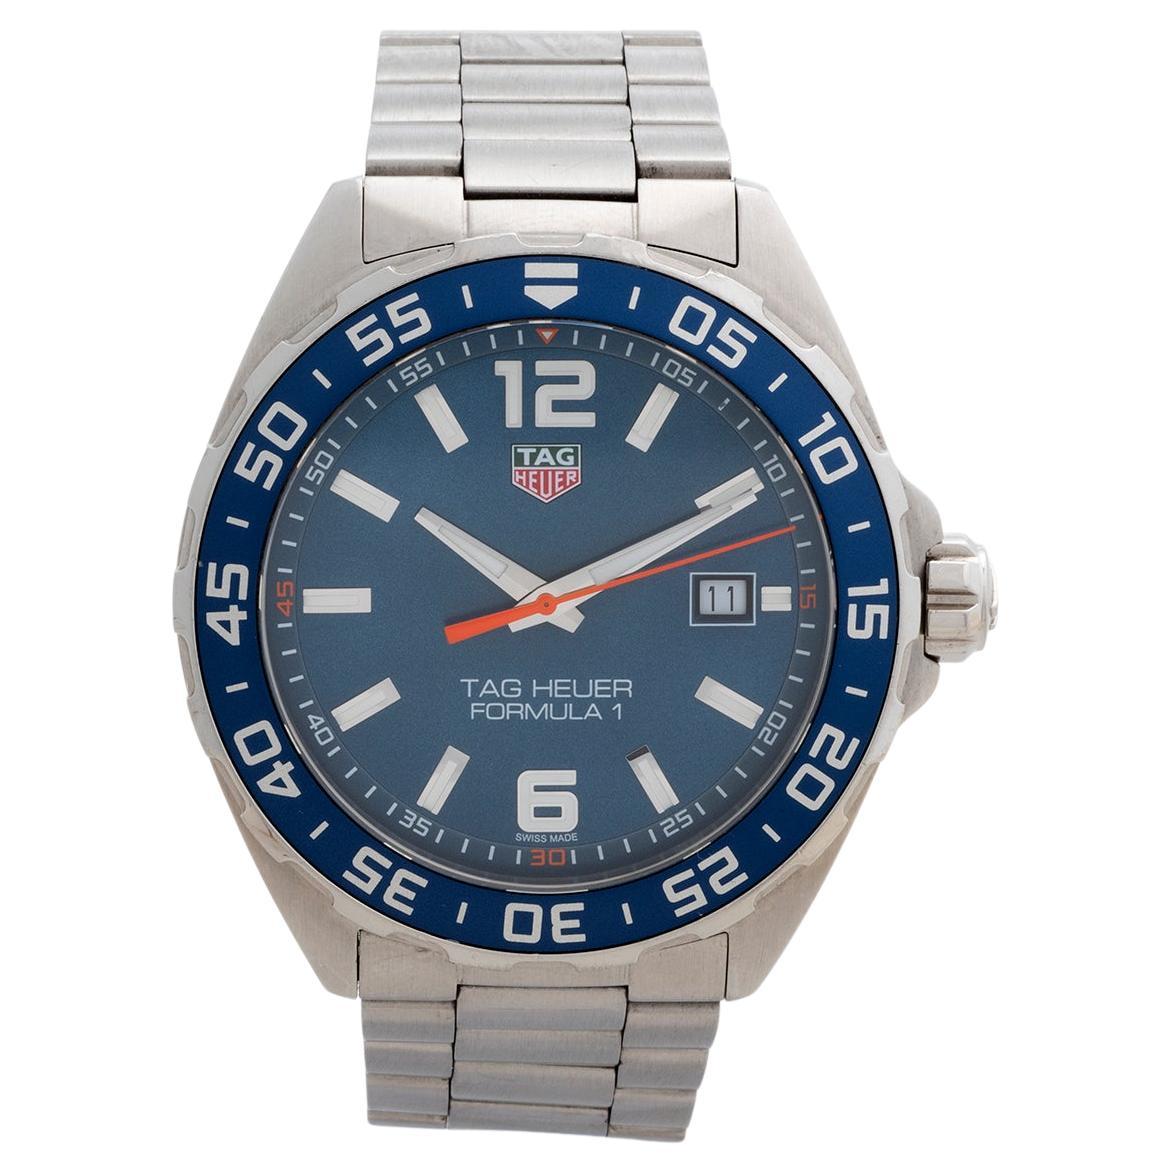 Our Tag Heuer Formula 1 quartz features a stainless steel 43mm case with stainless steel bracelet, the reference WAZ2010 is relatively scarce and features an attractive blue dial with orange seconds hand. A versatile sports watch, this example comes